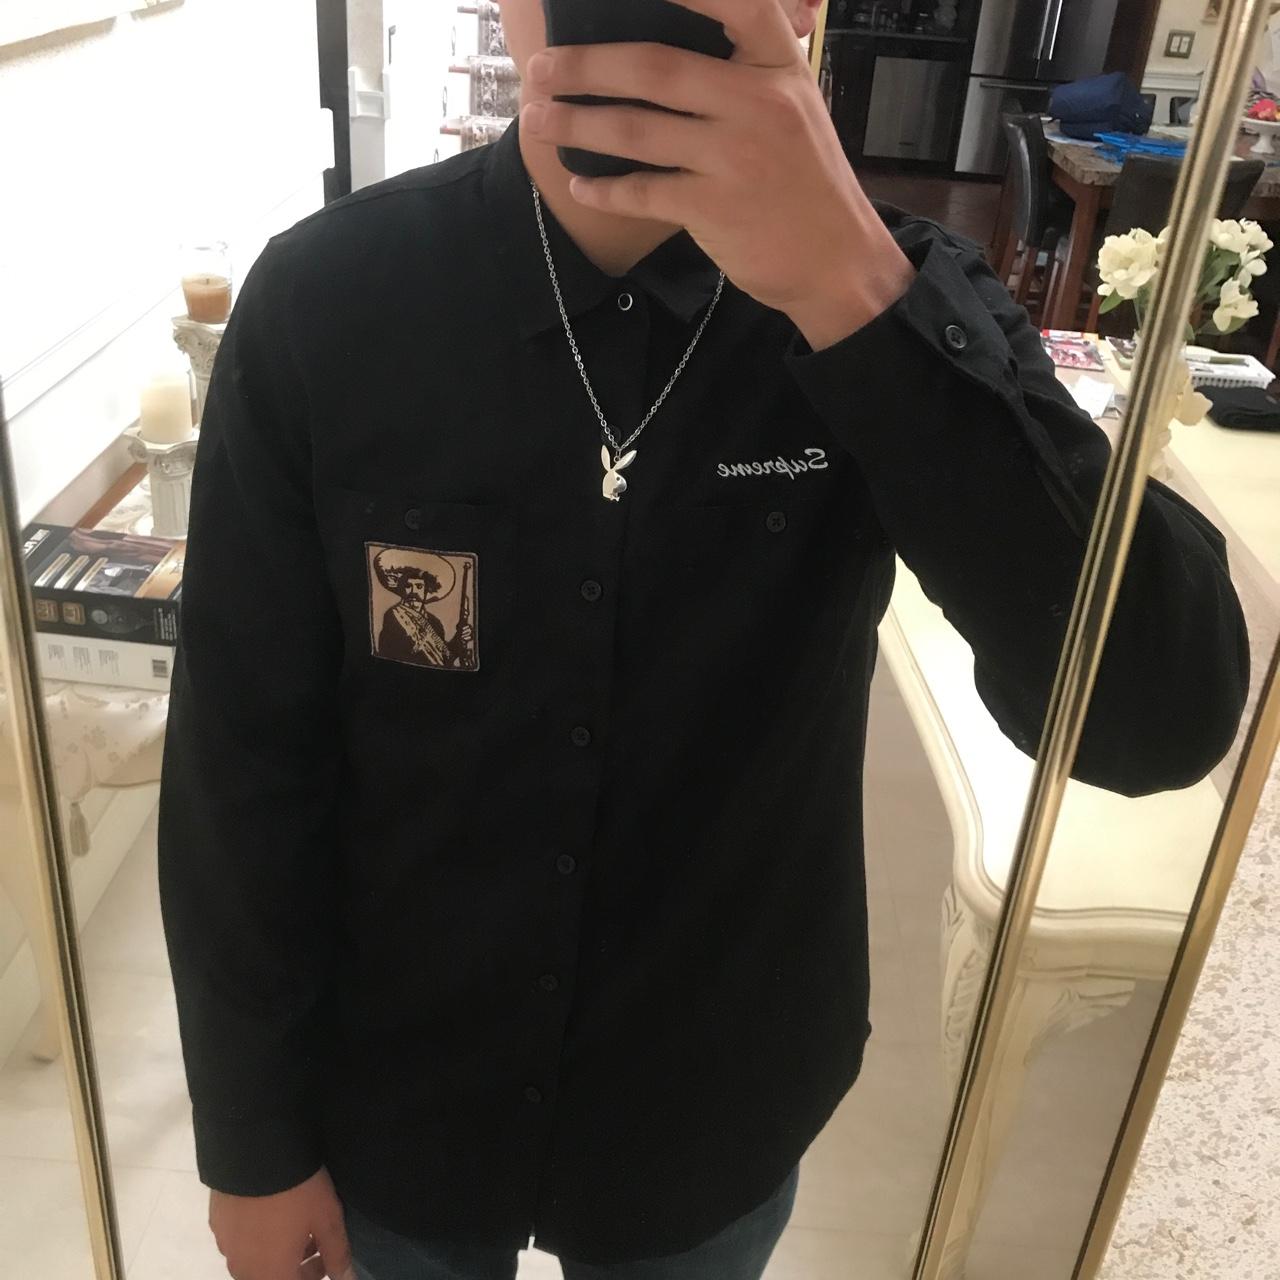 Supreme Zapata work shirt from SS 17. Only tried on, - Depop